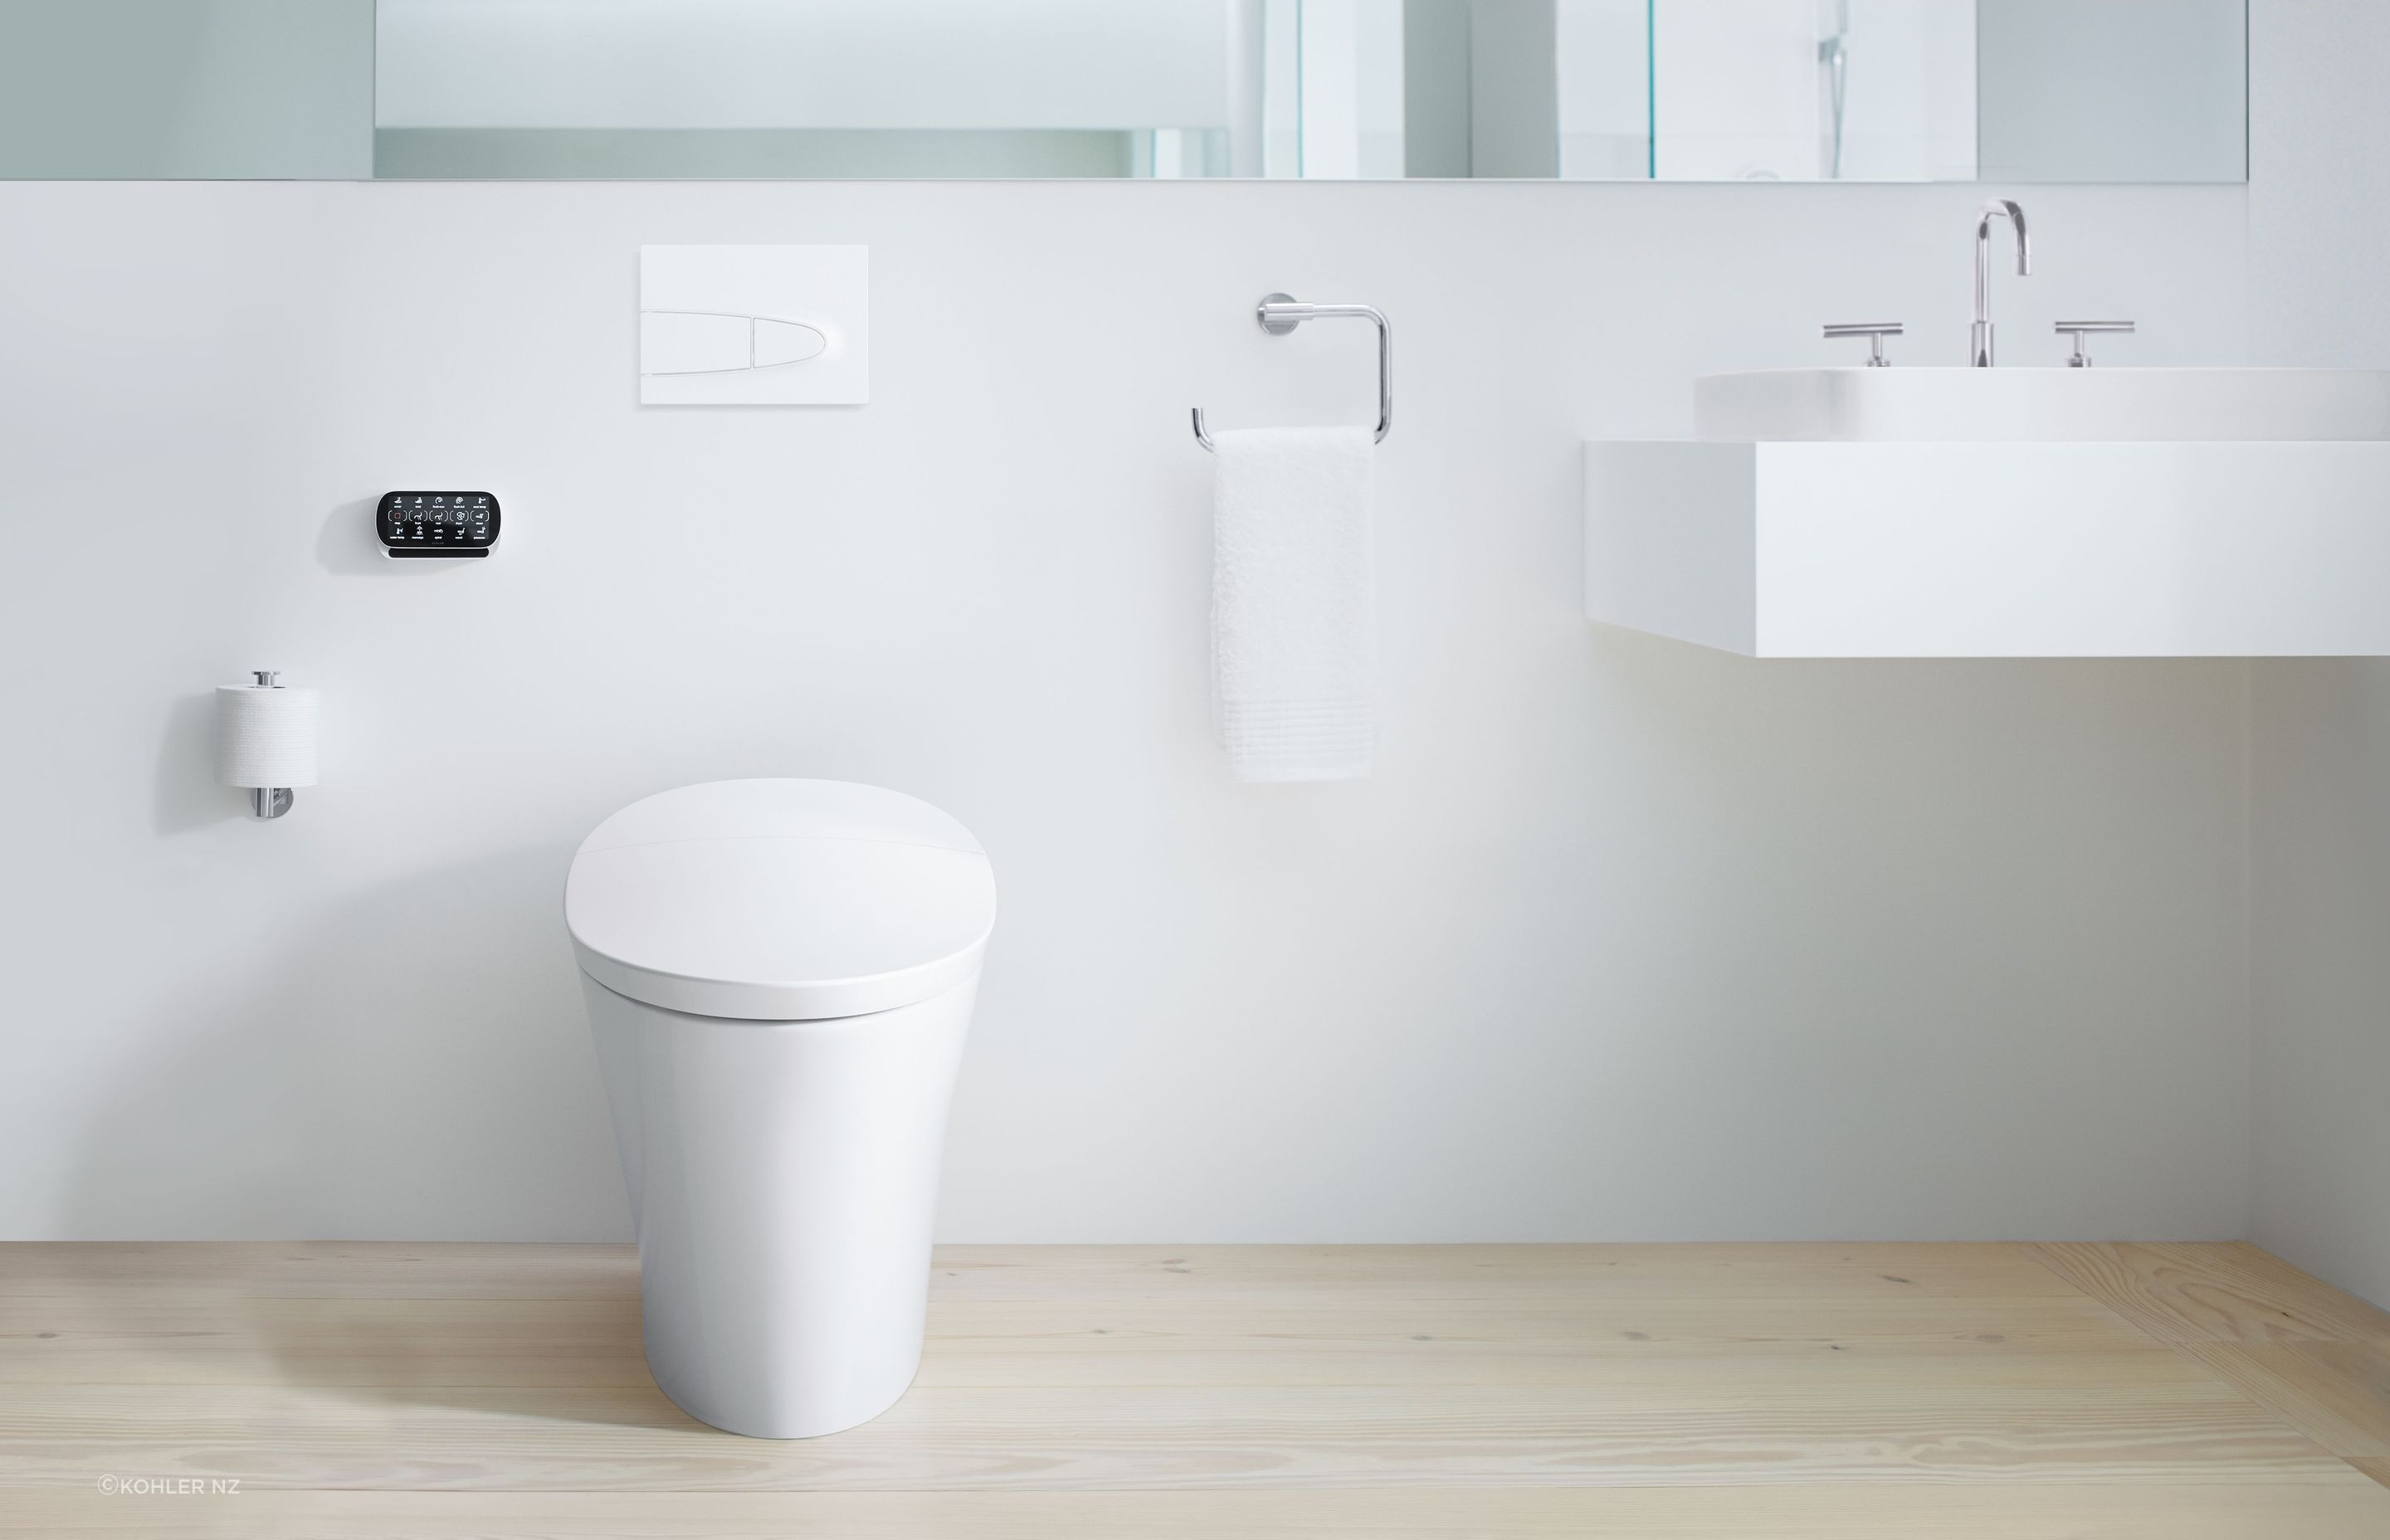 Full of features - the Veil Wall Faced Intelligent Toilet from Kohler NZ